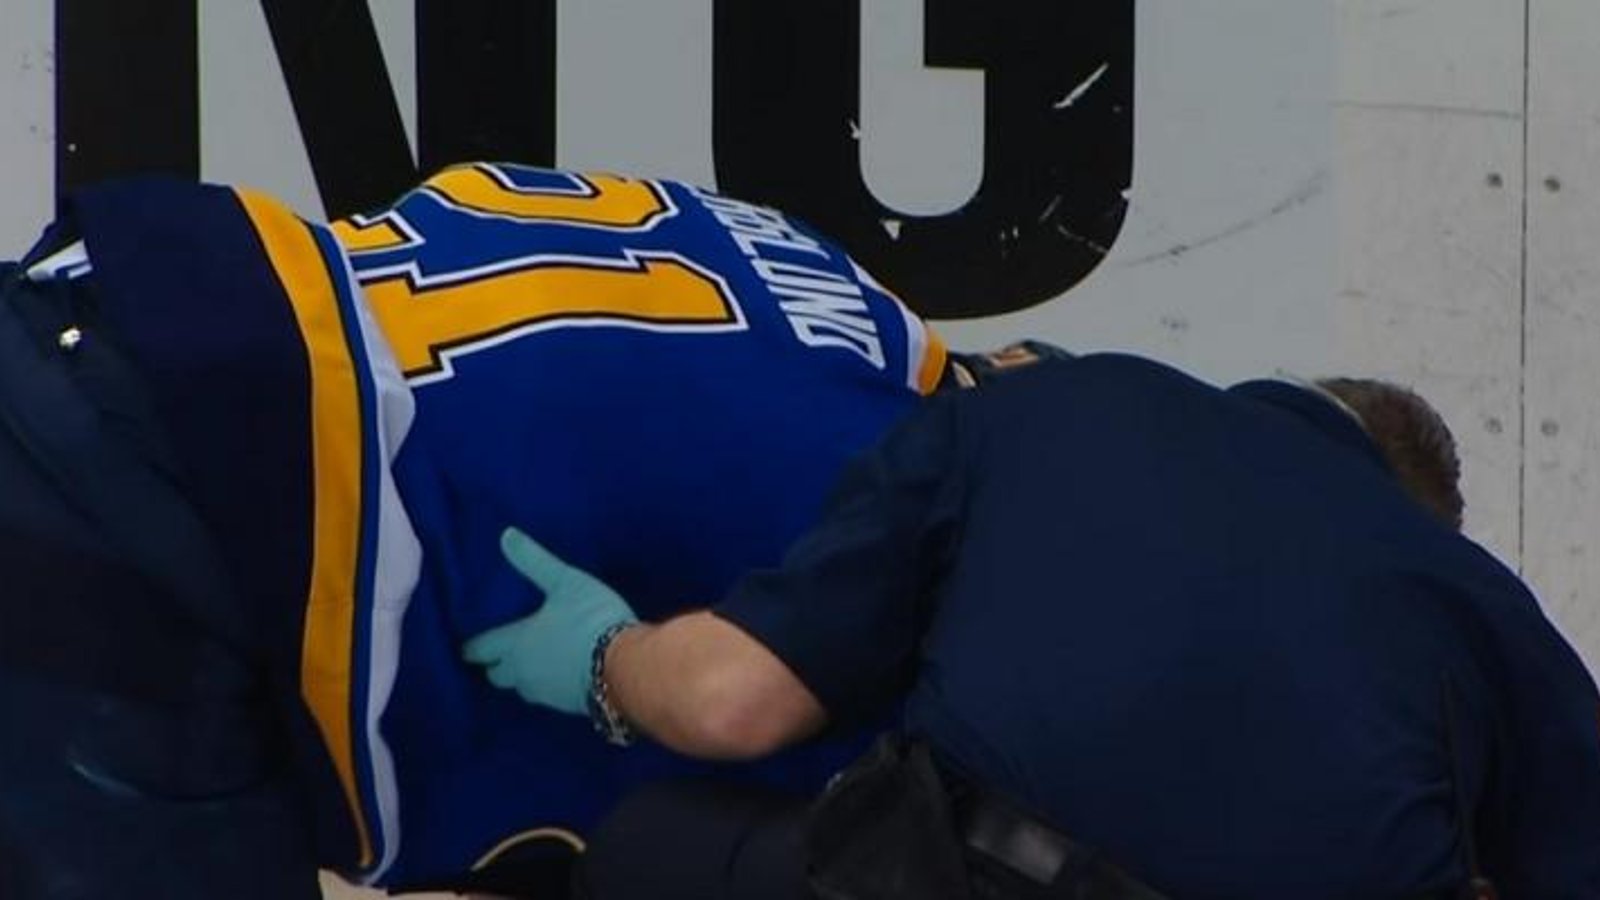 Berglund goes down after hit results in collision with open bench door.